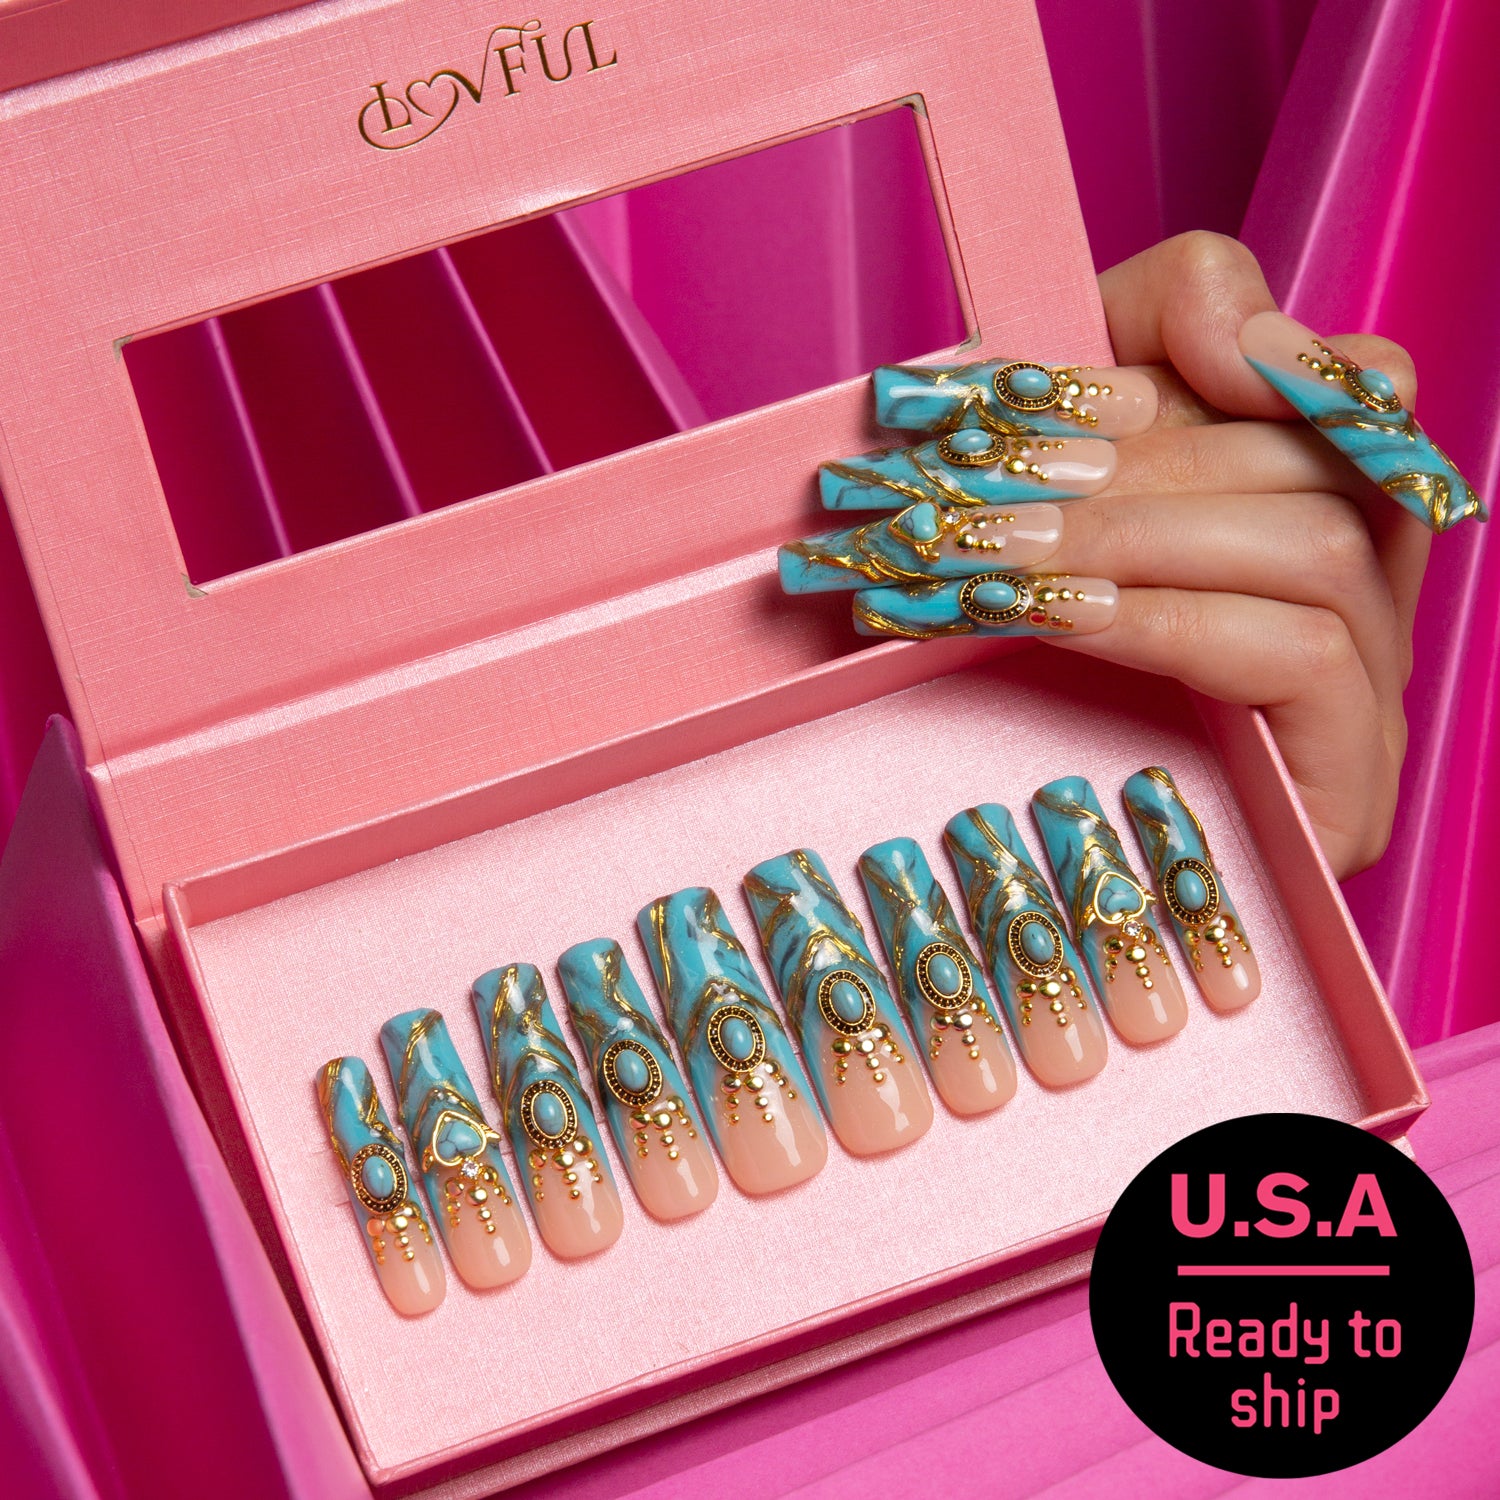 Set of turquoise and gold press-on nails in a pink Lovful box with a 'U.S.A Ready to Ship' label. Hand with matching nails is shown.